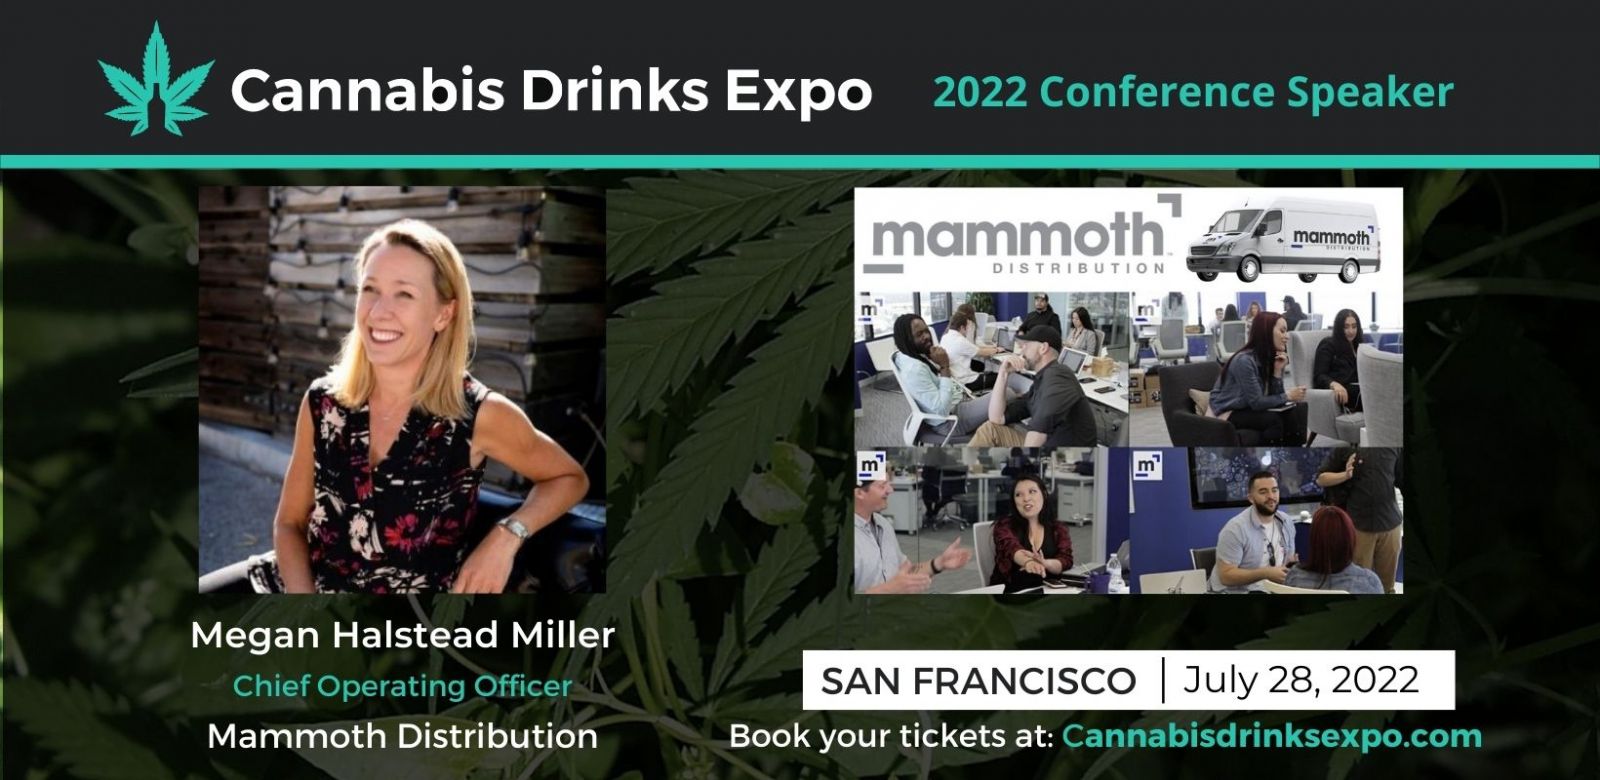 Photo for: Megan Halstead Miller is scheduled to speak at the 2022 Cannabis Drinks Expo.